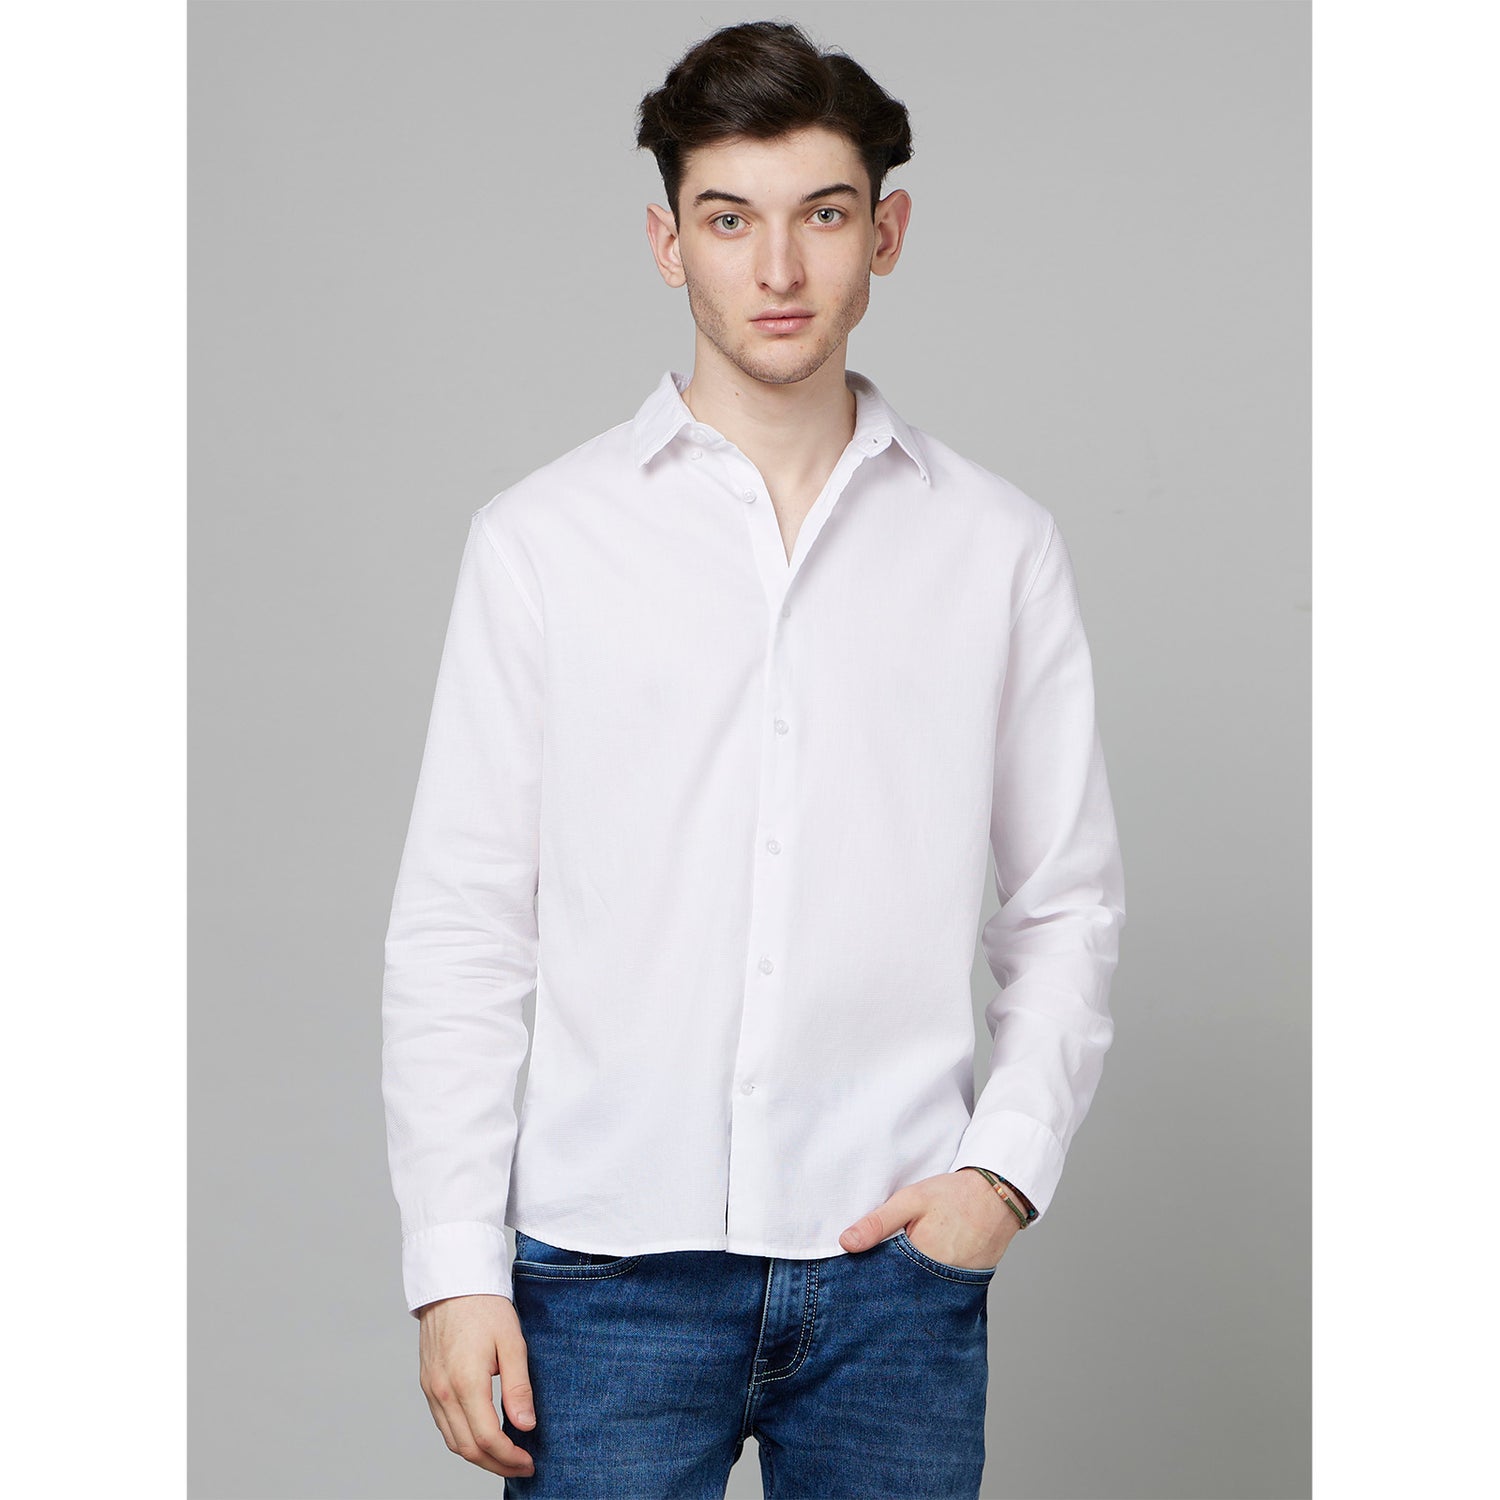 White Classic Regular Fit Spread Collar Opaque Cotton Casual Shirt (FAWAFLSH)